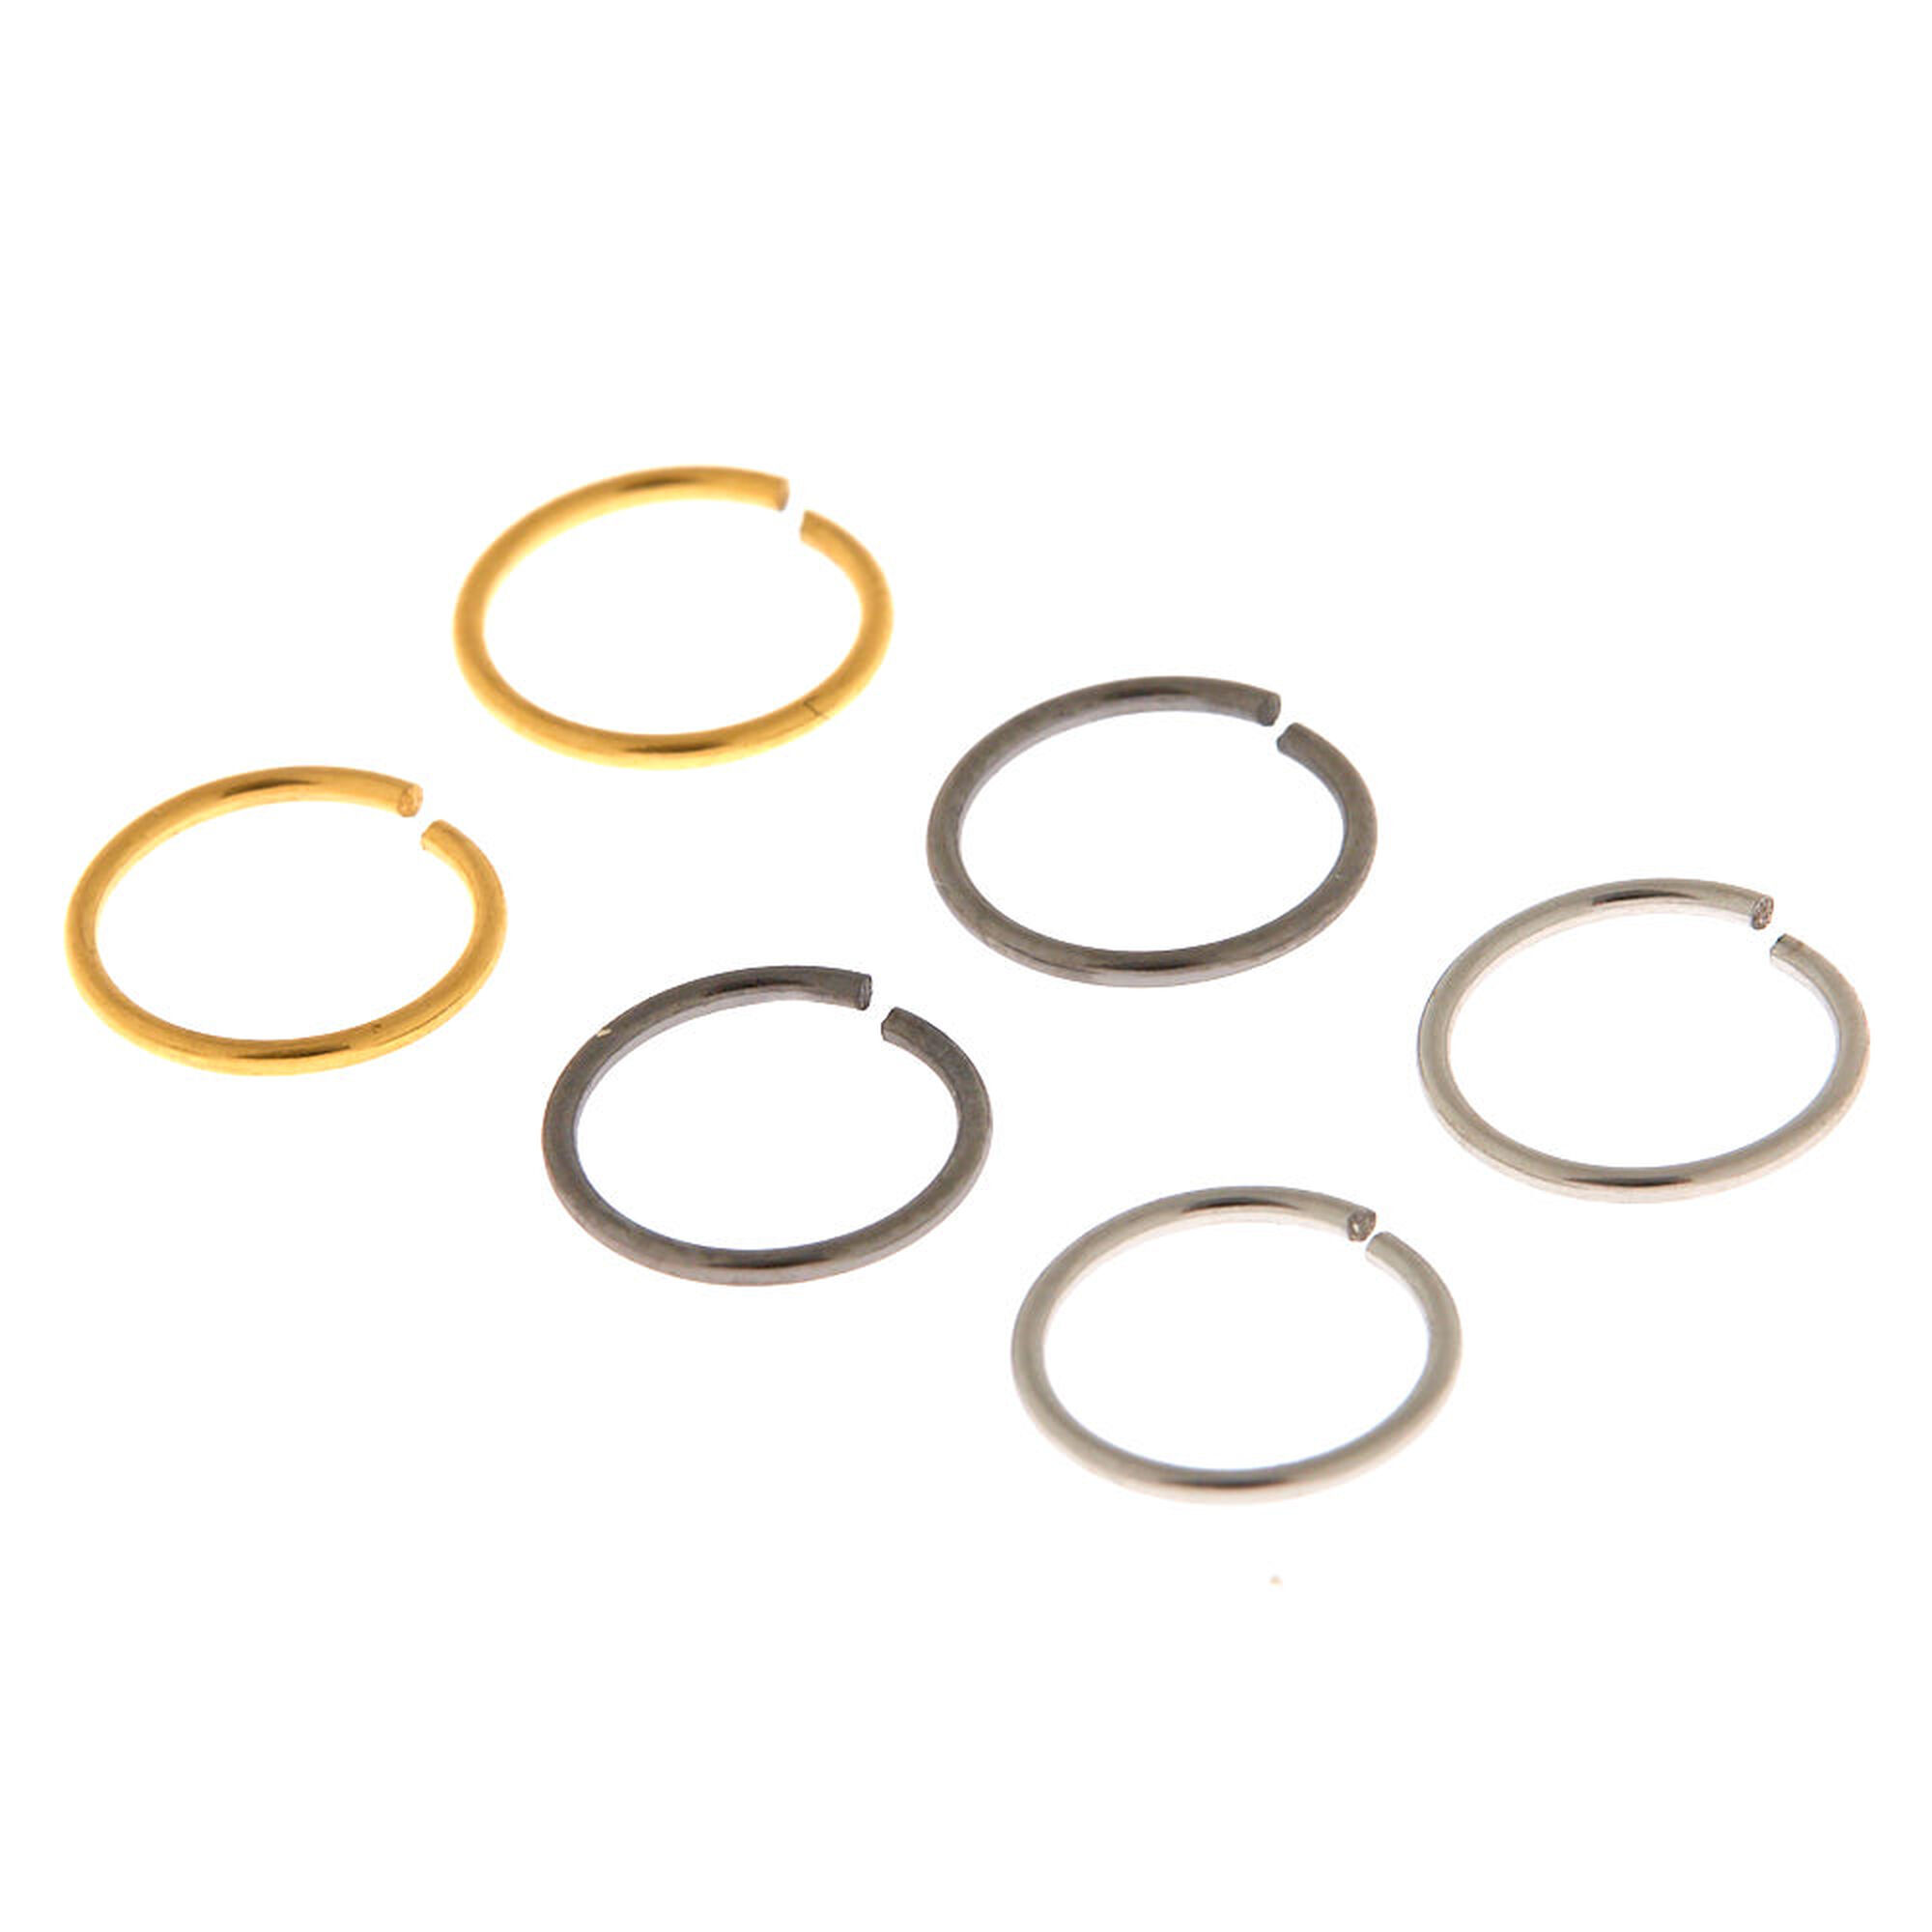 View Claires Mixed Metal 20G Solid Nose Hoop Rings 6 Pack Gold information